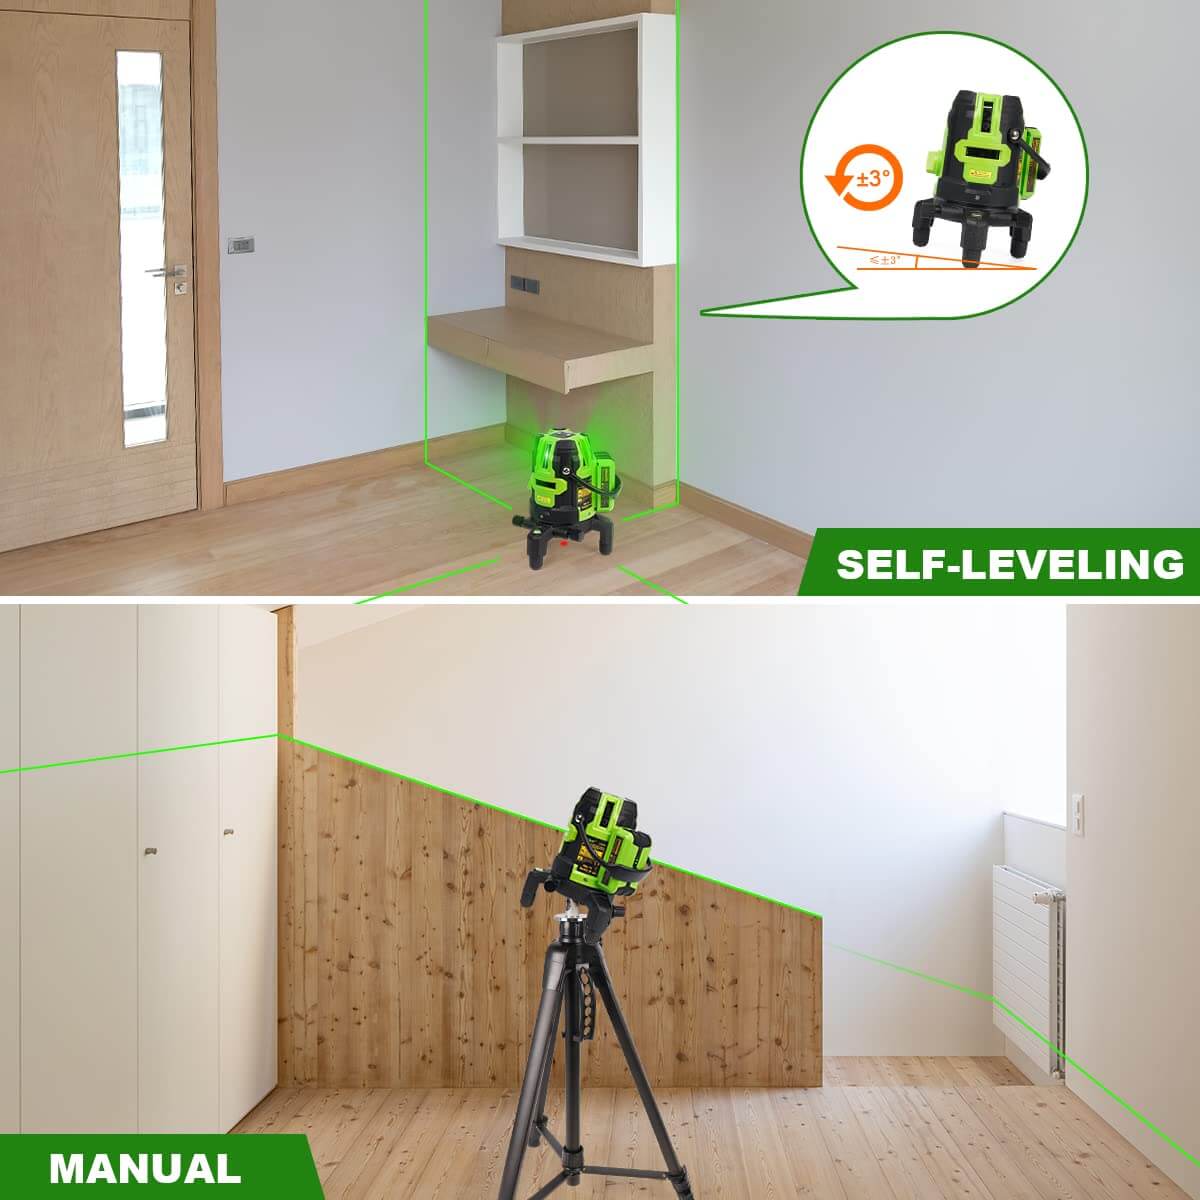 Huepar L141G - Cross Line Green Laser Level with Removable Battery, Self-Leveling Multi-line Levels Included 360°Rotating Base, Pulse Mode, 4 Vertical and 1 Horizontal Lines, Down Plumb Point